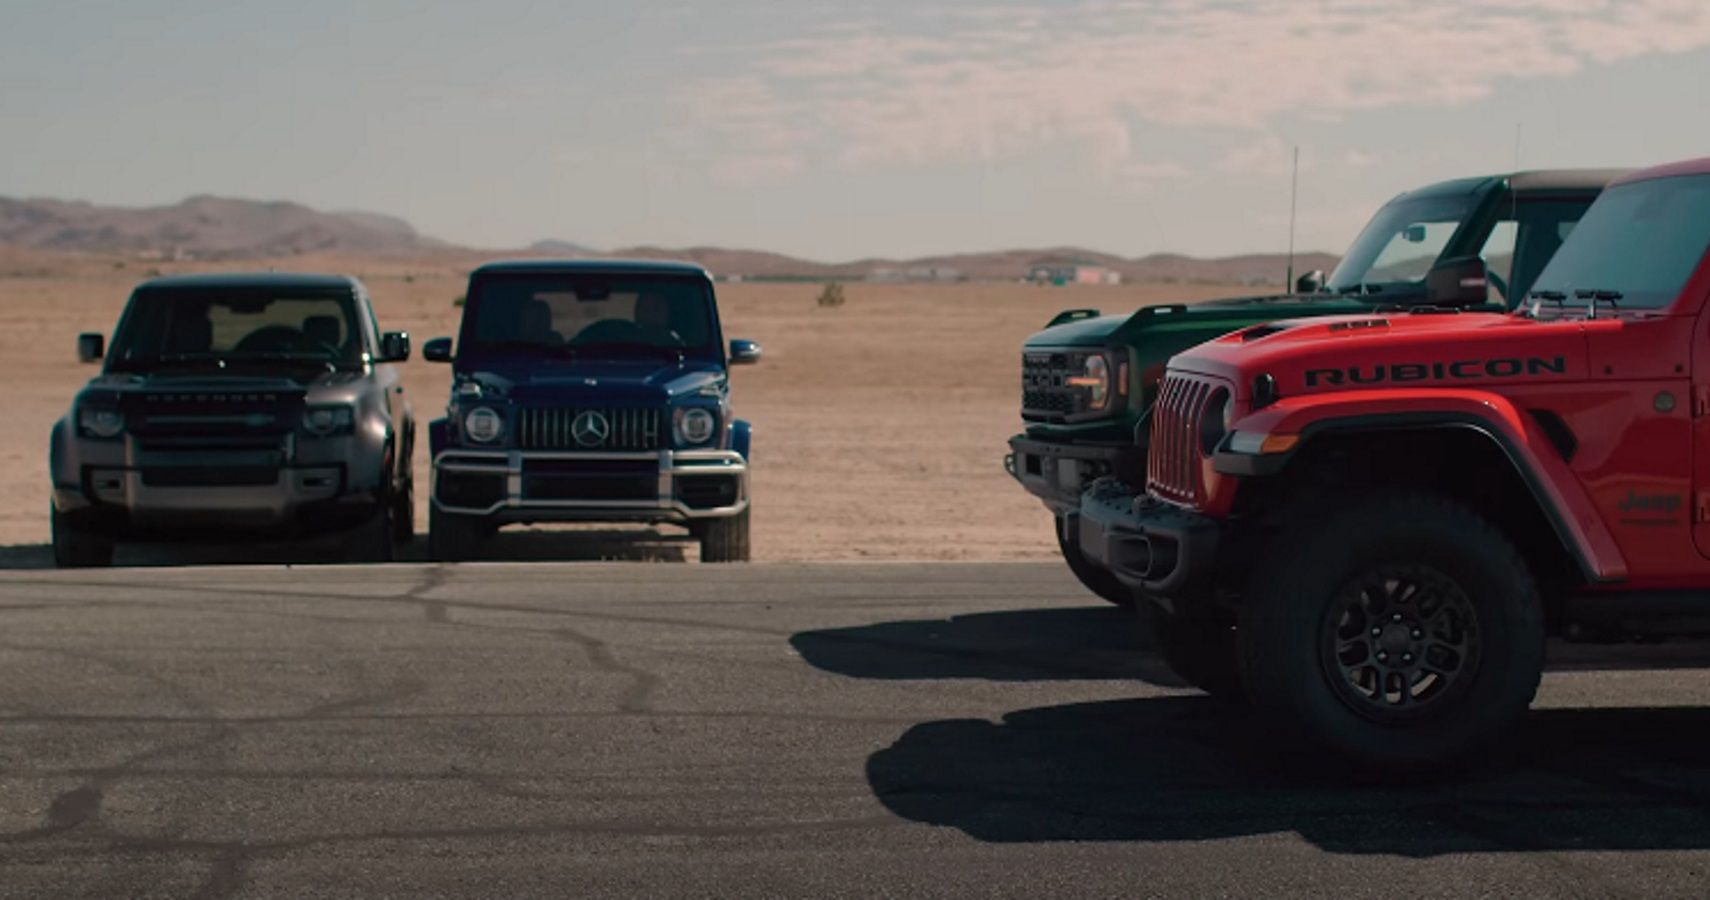 SUV showdown with a Land Rover Defender, Mercedes-AMG G63, Ford Bronco Raptor and Jeep Wrangler Rubicon 392